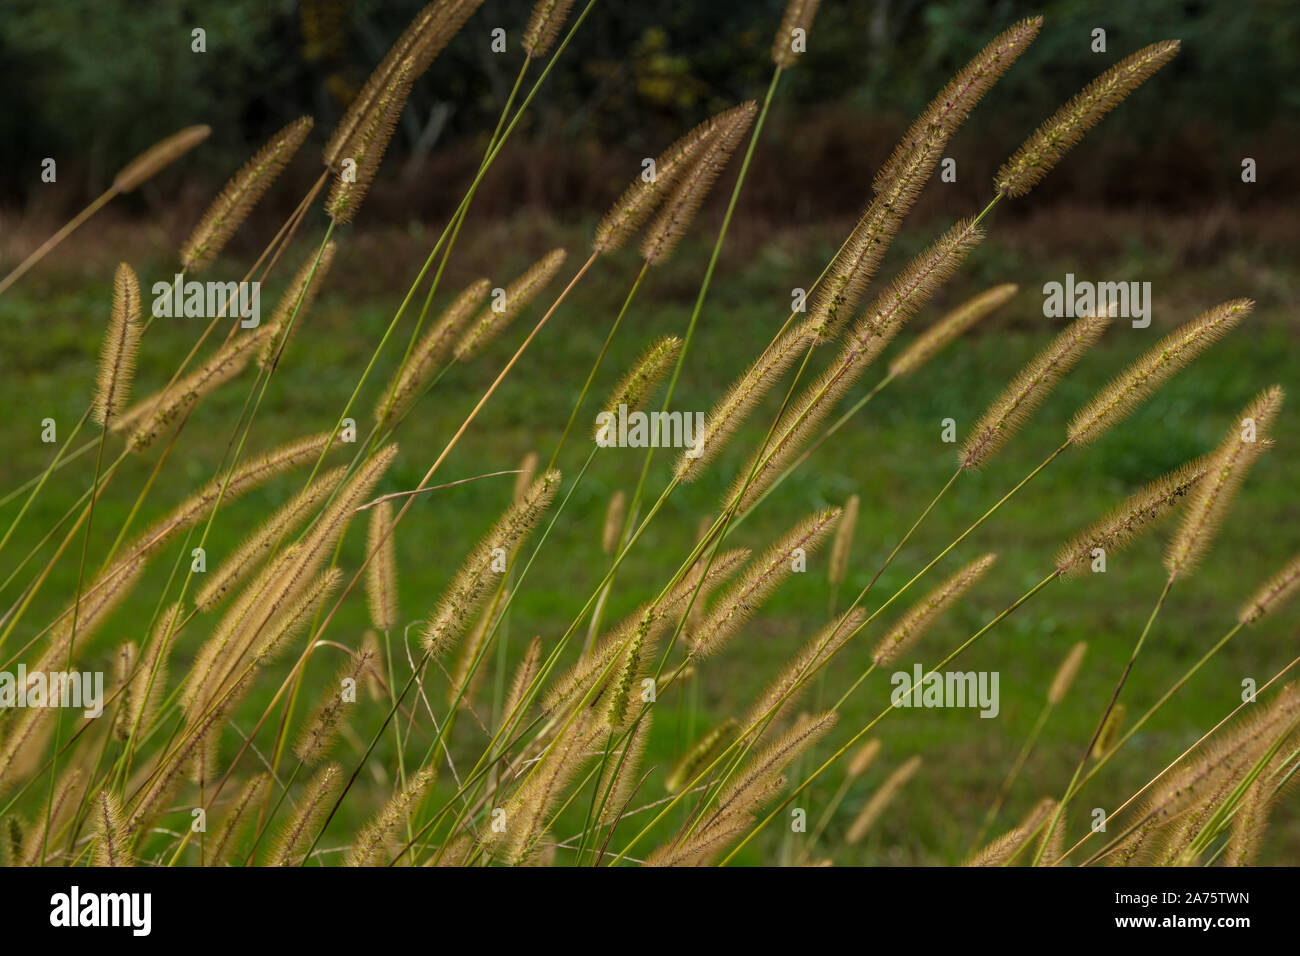 Tall and mature foxtail grasses with seeds growing in the field on a bright sunny day in autumn Stock Photo